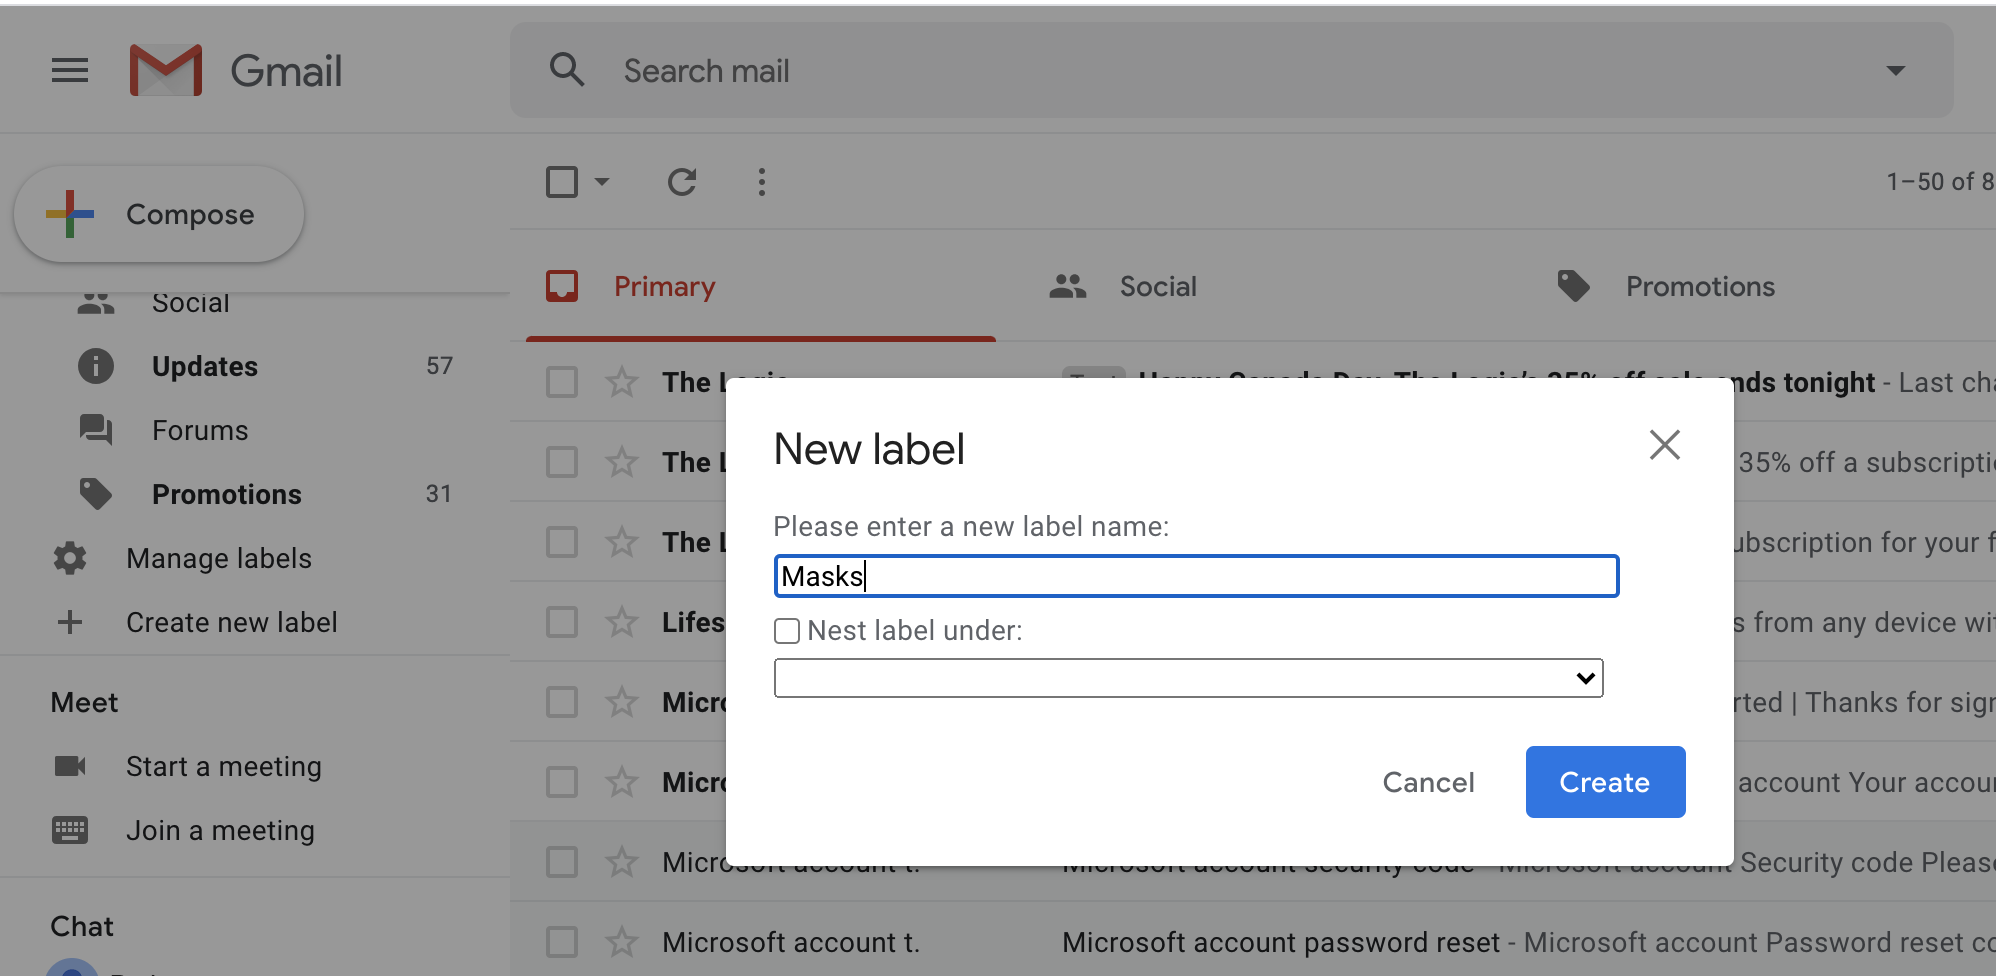 How to tame your Gmail inbox with labels – The Verge